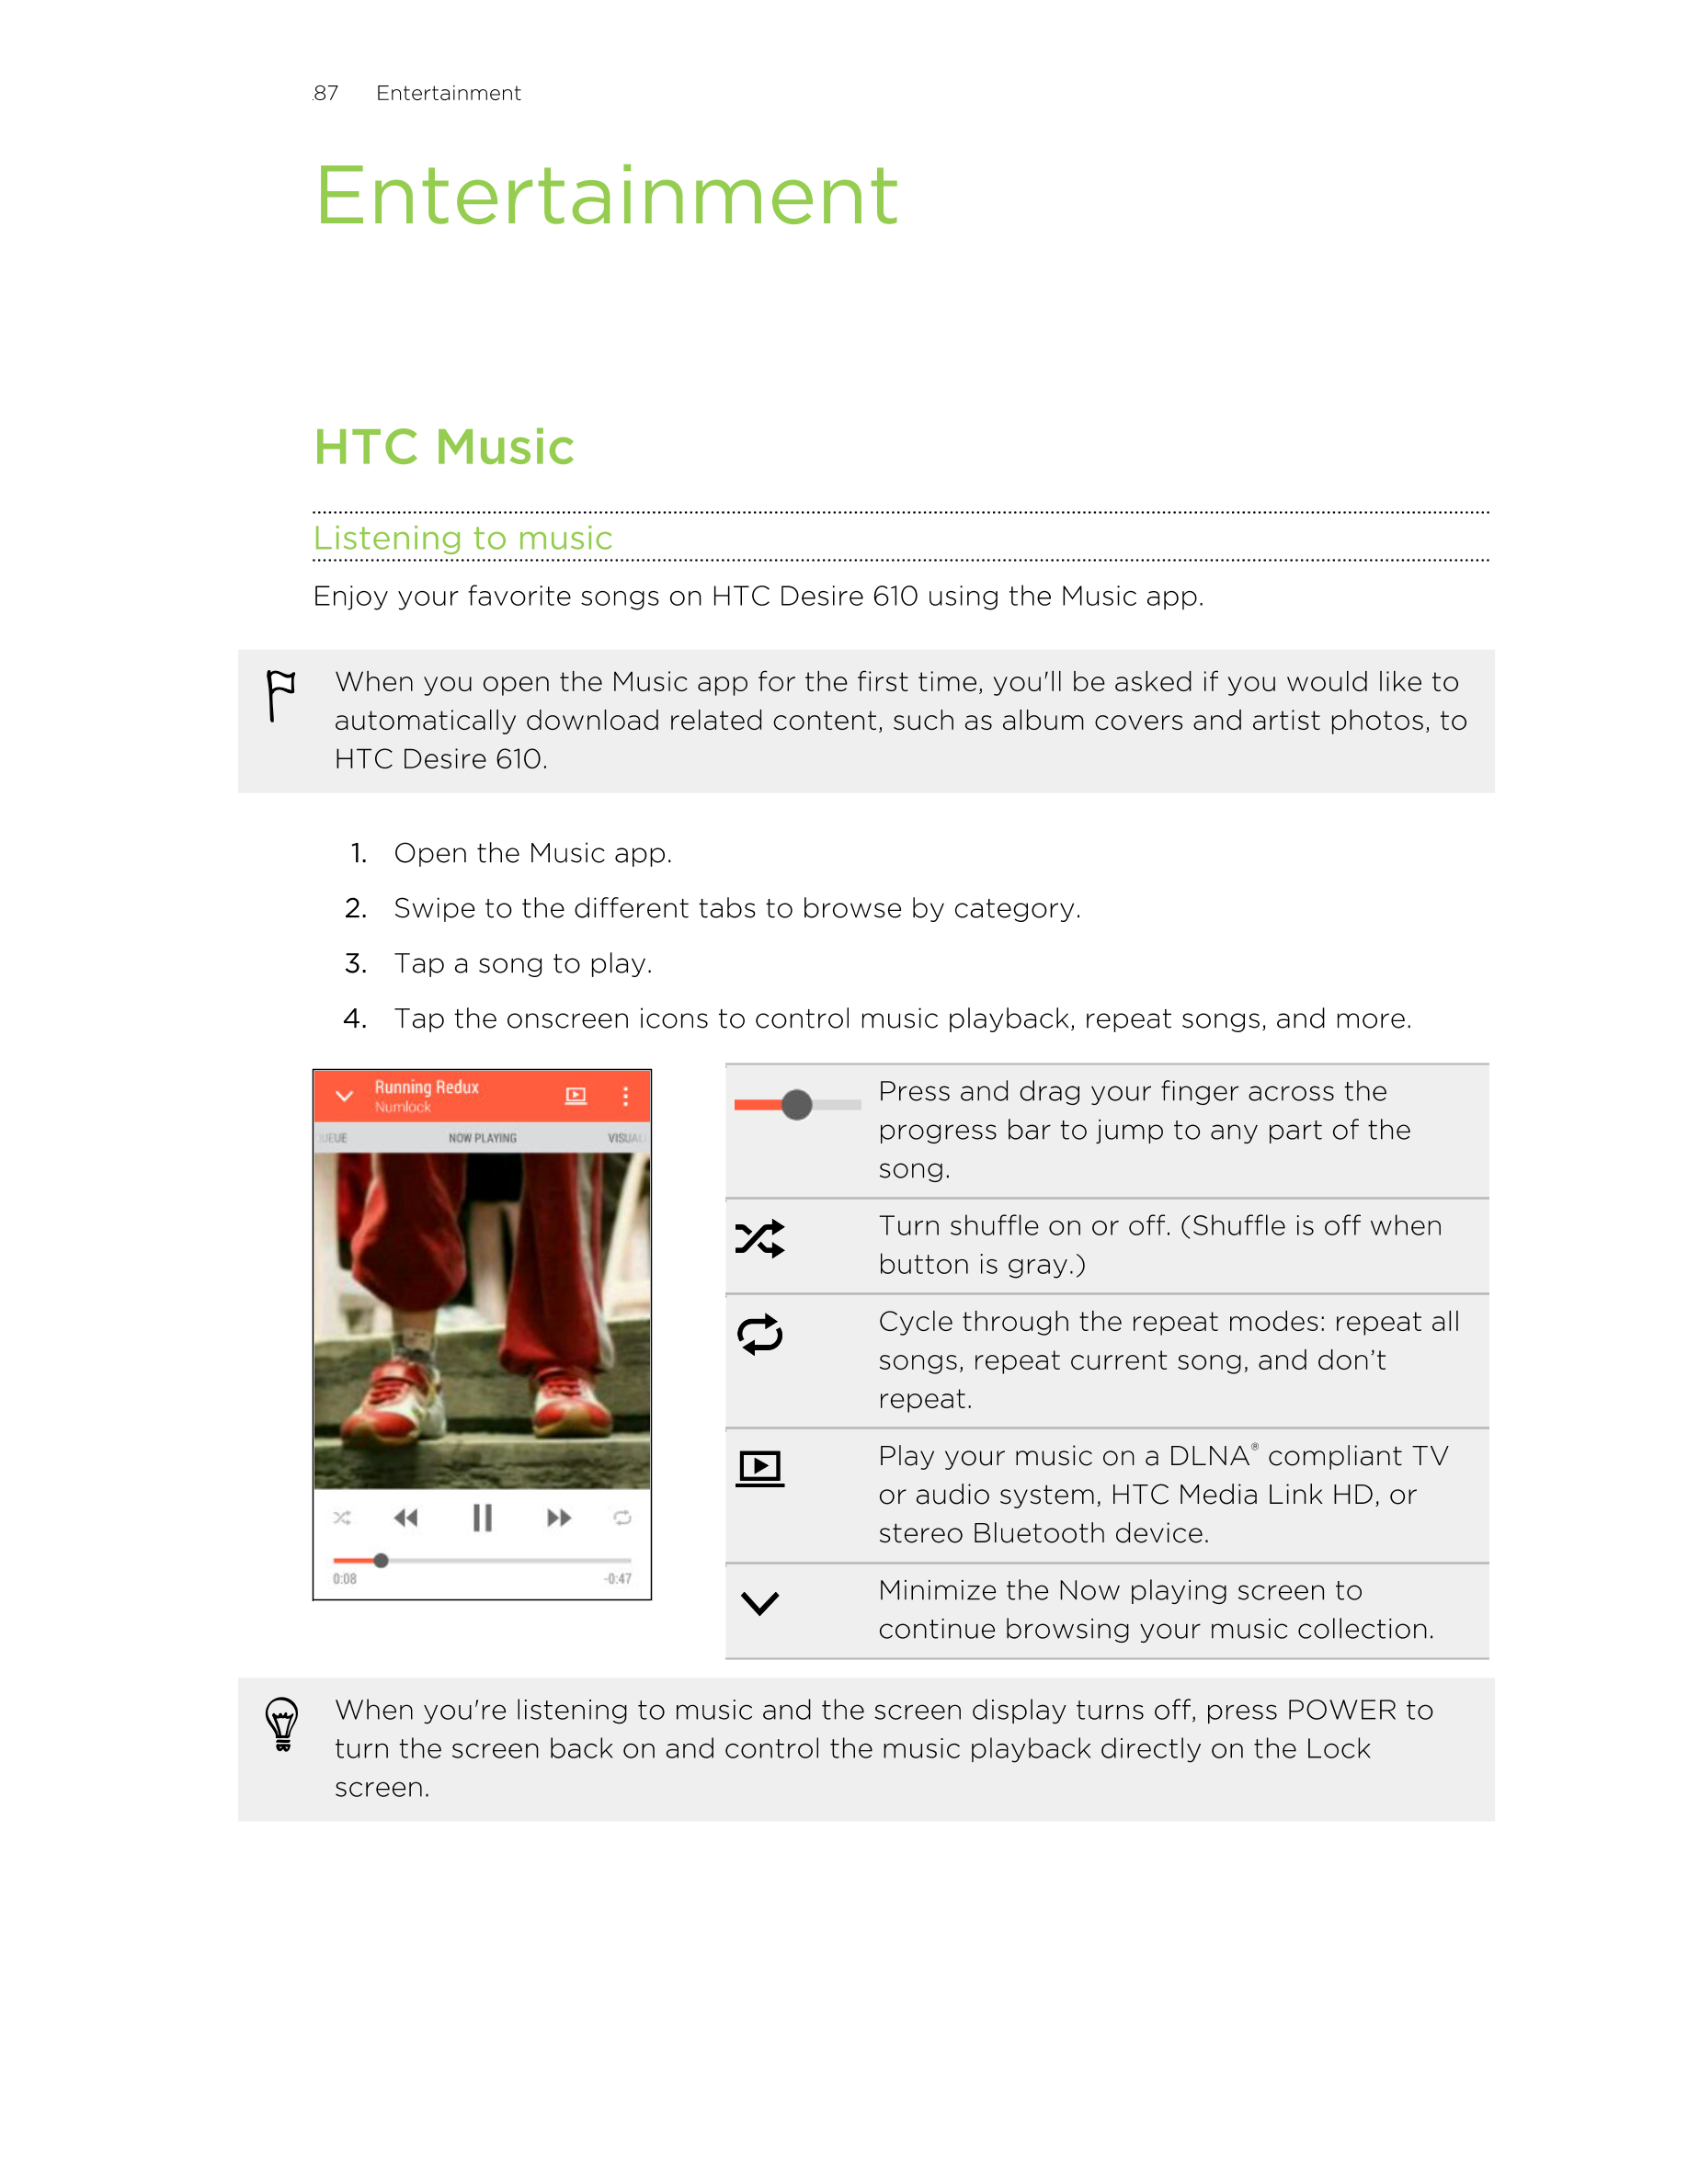 87      Entertainment
Entertainment
HTC Music
Listening to music
Enjoy your favorite songs on HTC Desire 610 using the Music app